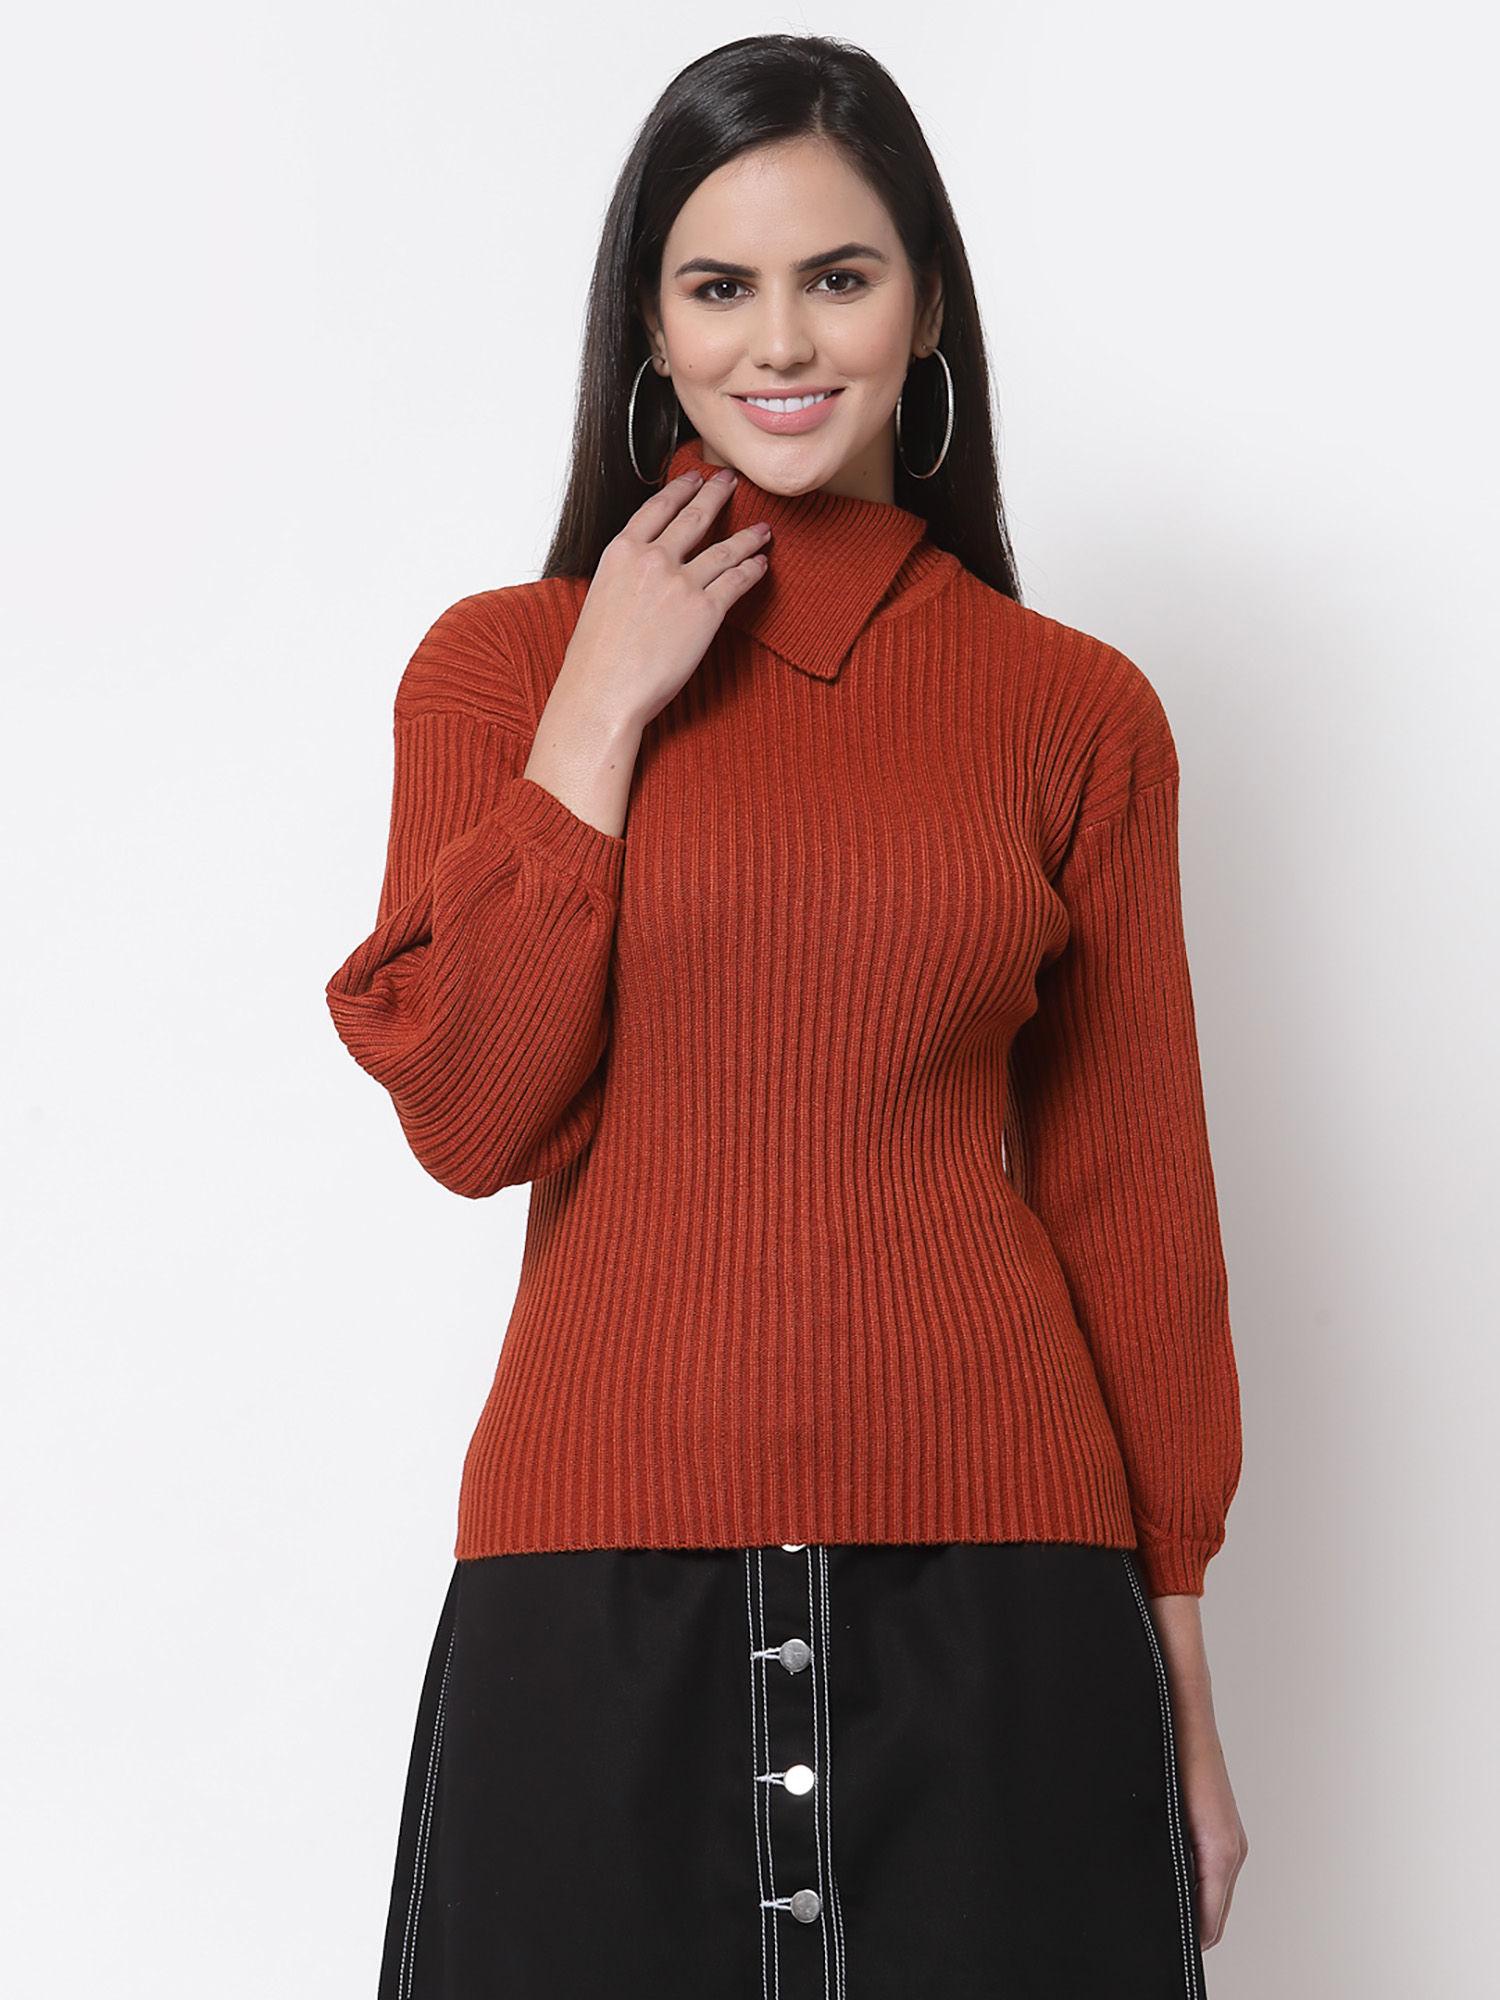 women-brown-solid-sweater